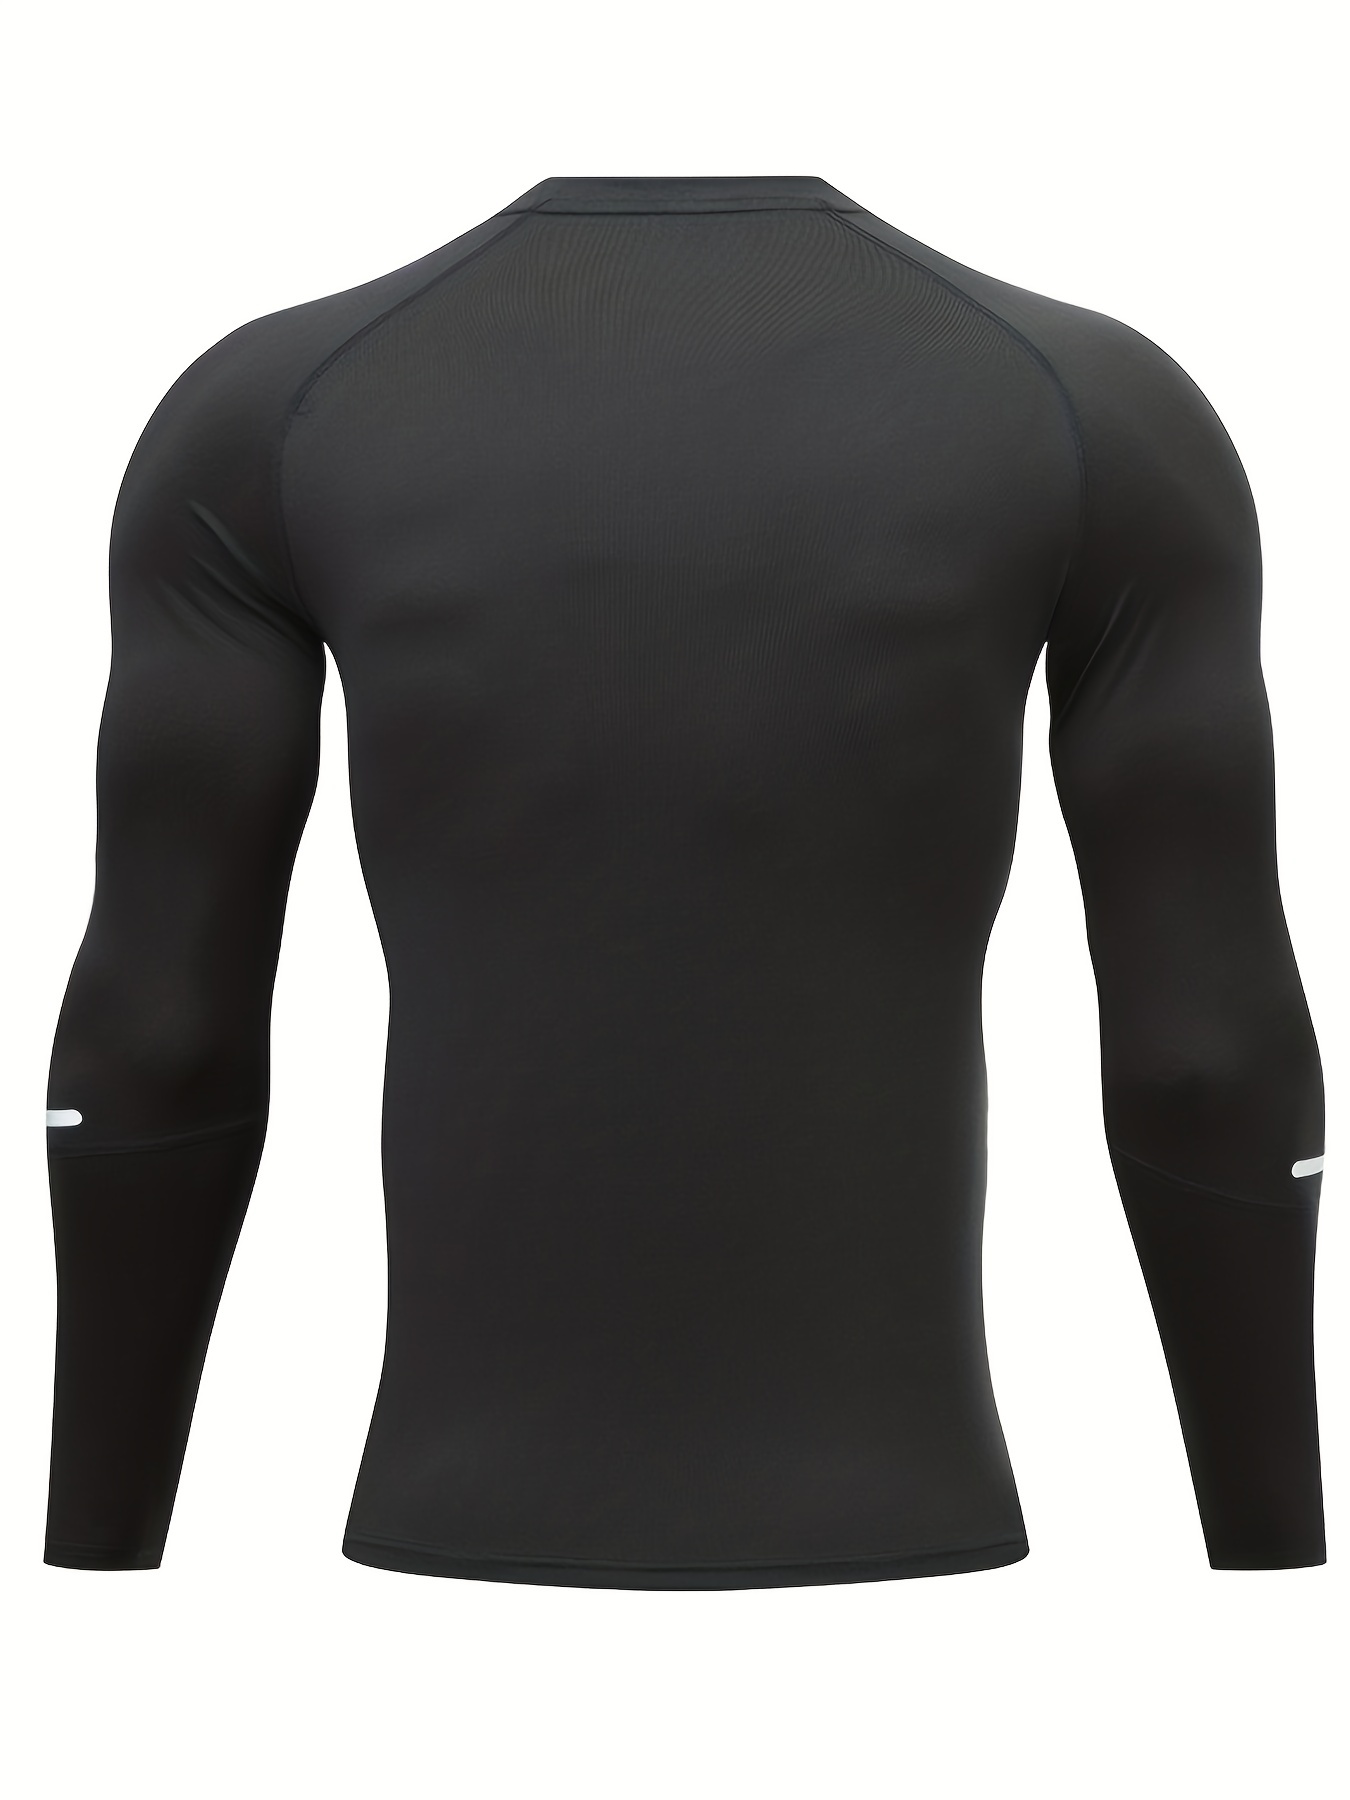  Men's Compression Shirts Long Sleeve High Neck Athletic Workout  Slim Tops Gym Undershirts Active Sports BaselayersA Black : Sports &  Outdoors